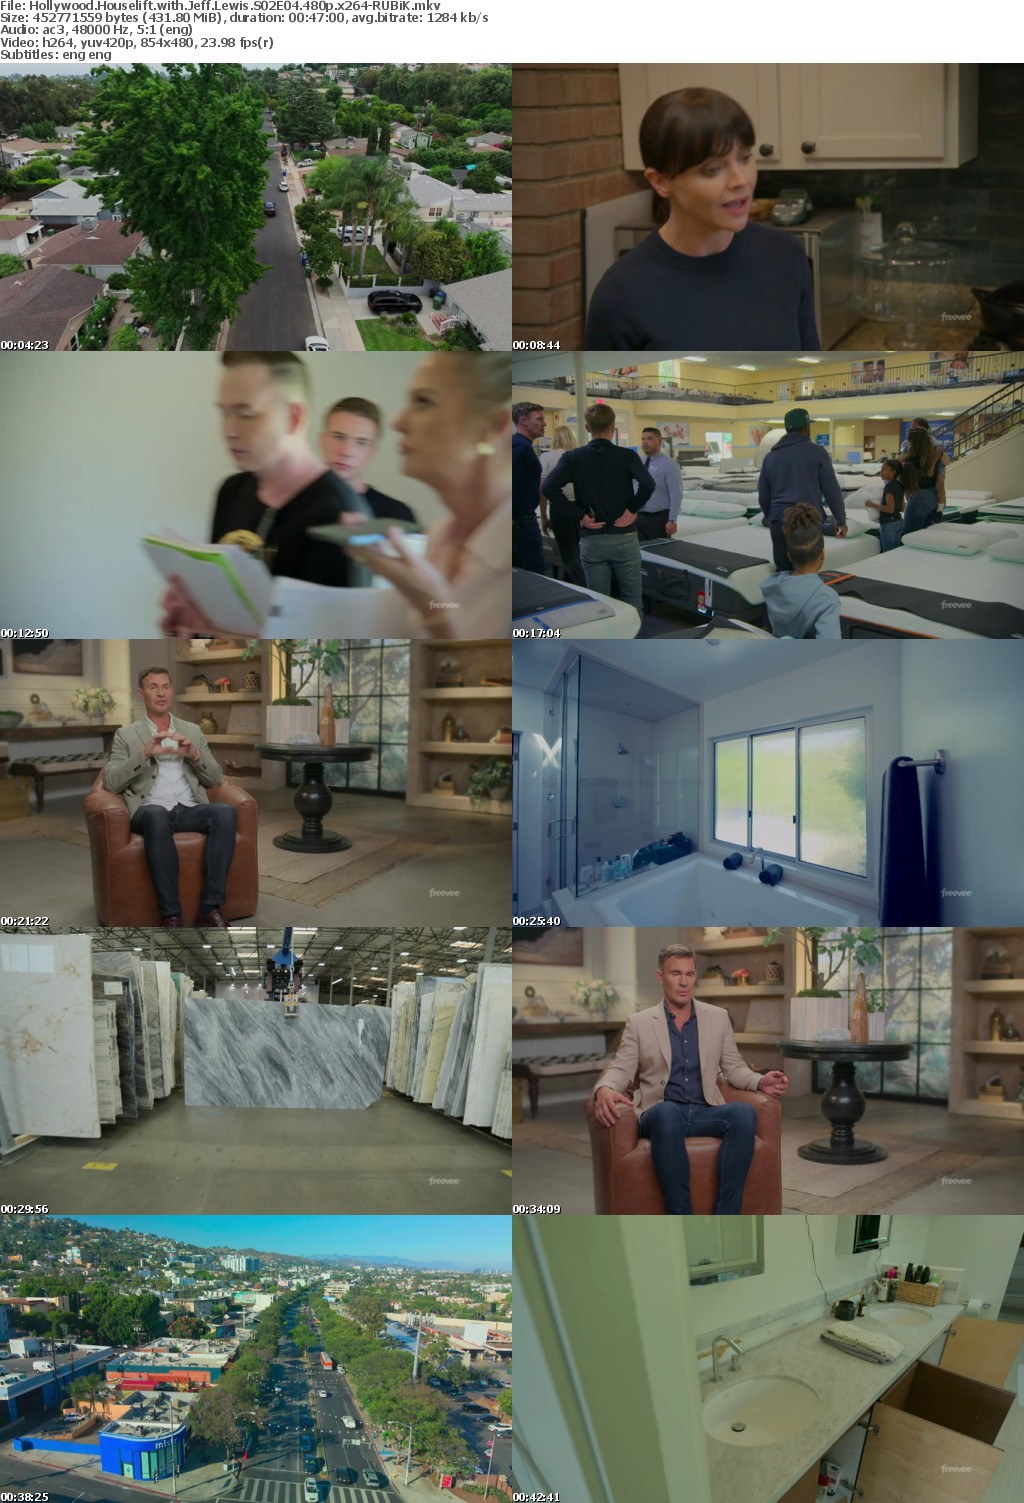 Hollywood Houselift with Jeff Lewis S02E04 480p x264-RUBiK